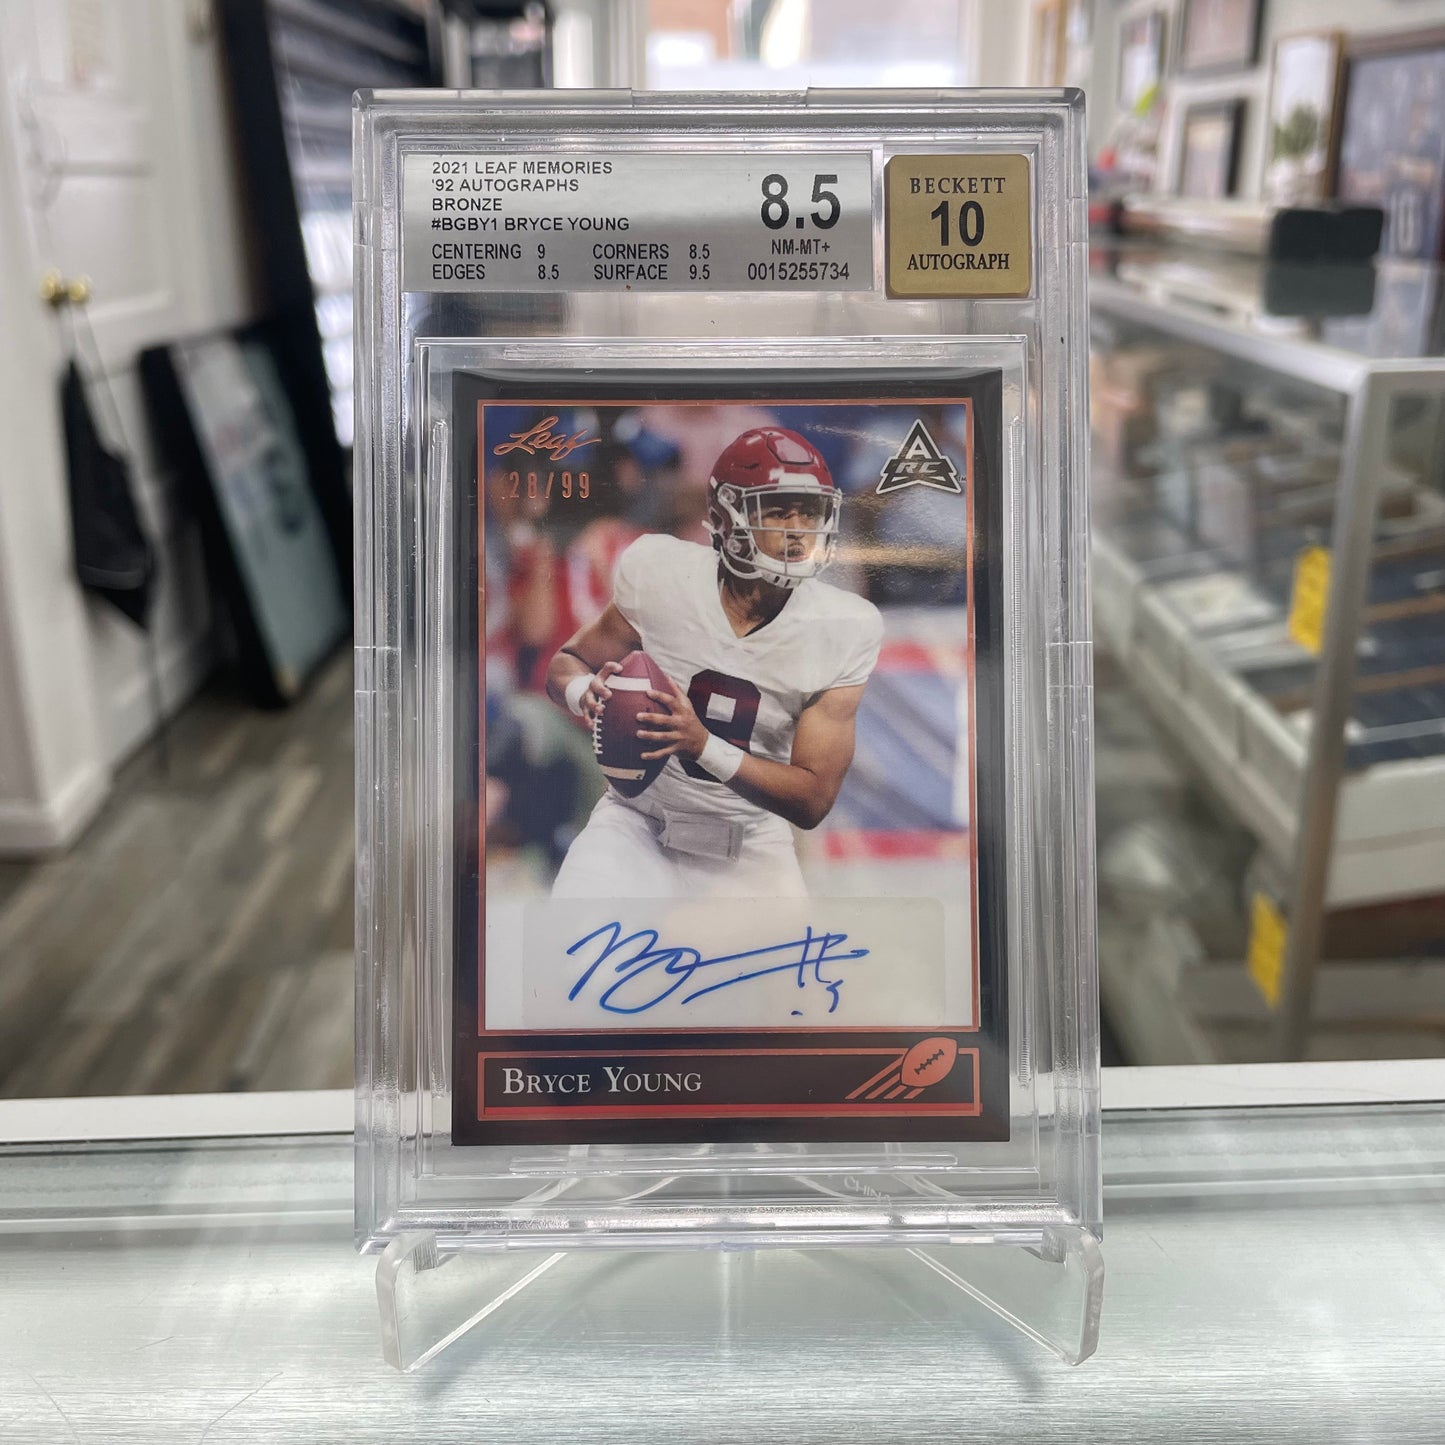 2021 Leaf Memories Bryce Young Autograph /99 BGS 8.5 Auto 10 RC Rookie Card Signed